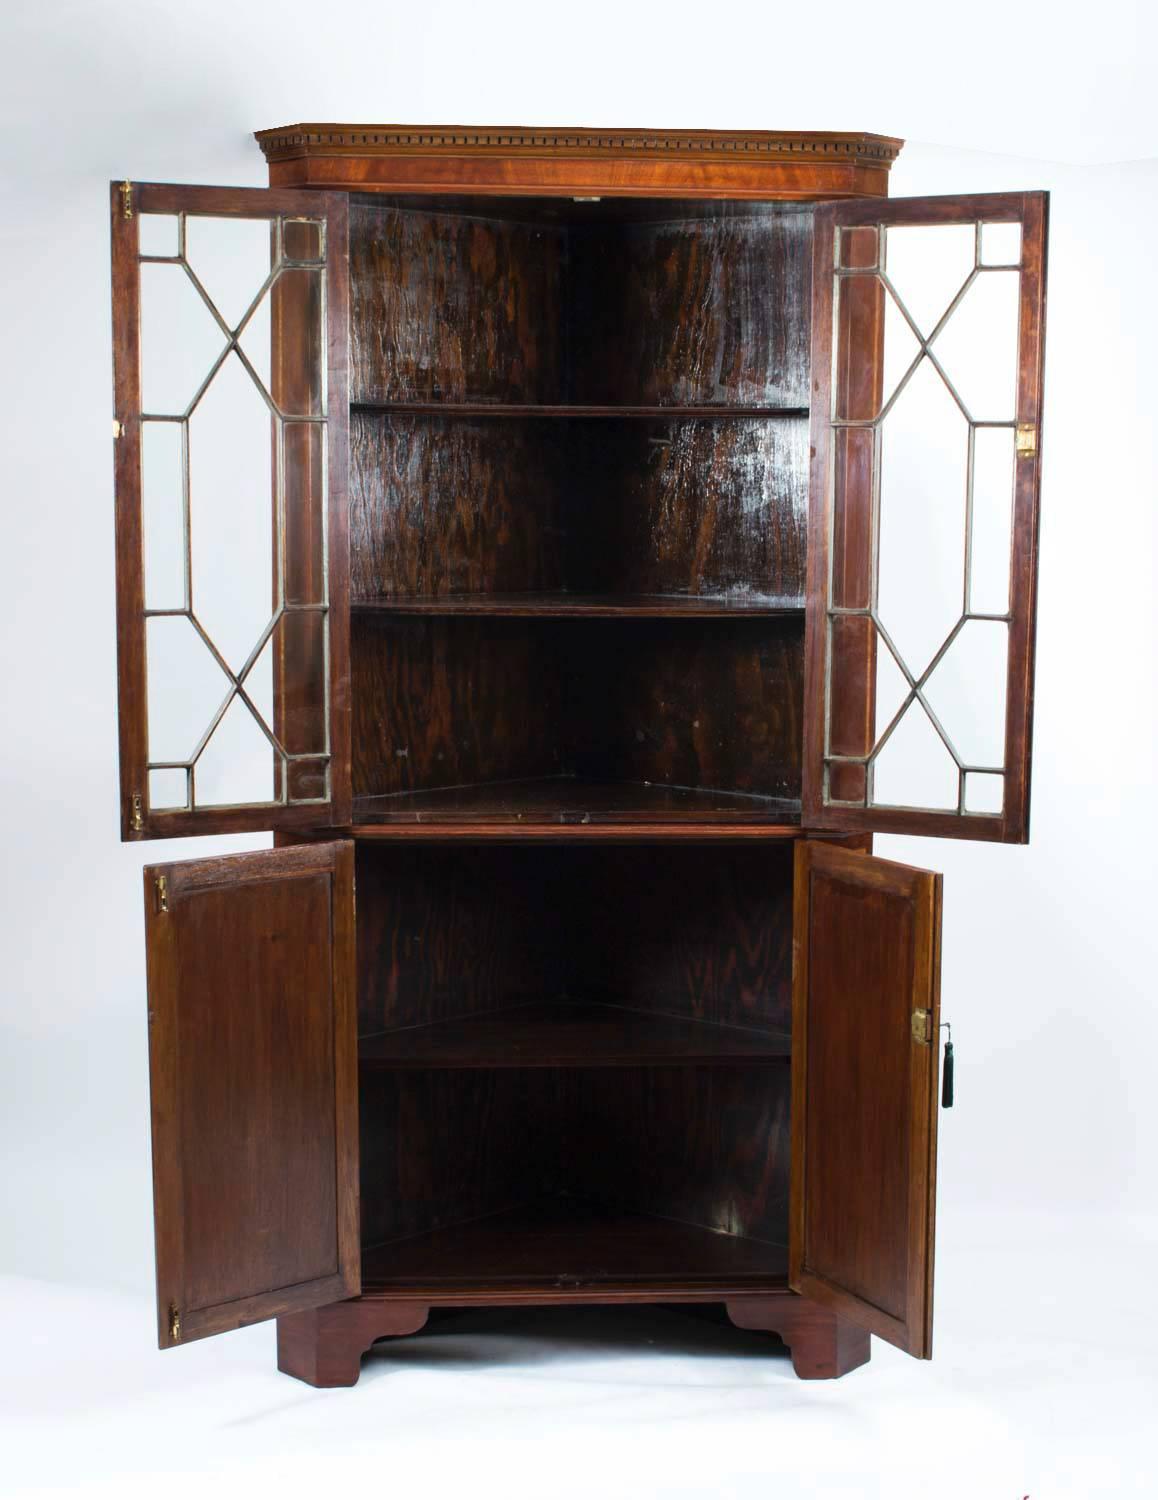 This is a fabulous antique English Edwardian, mahogany two door corner cabinet profusely inlaid with satinwood and ebony crossbanding with boxwood and ebony stringing.

It dates from circa 1890, the end of the Victorian period and the start of the